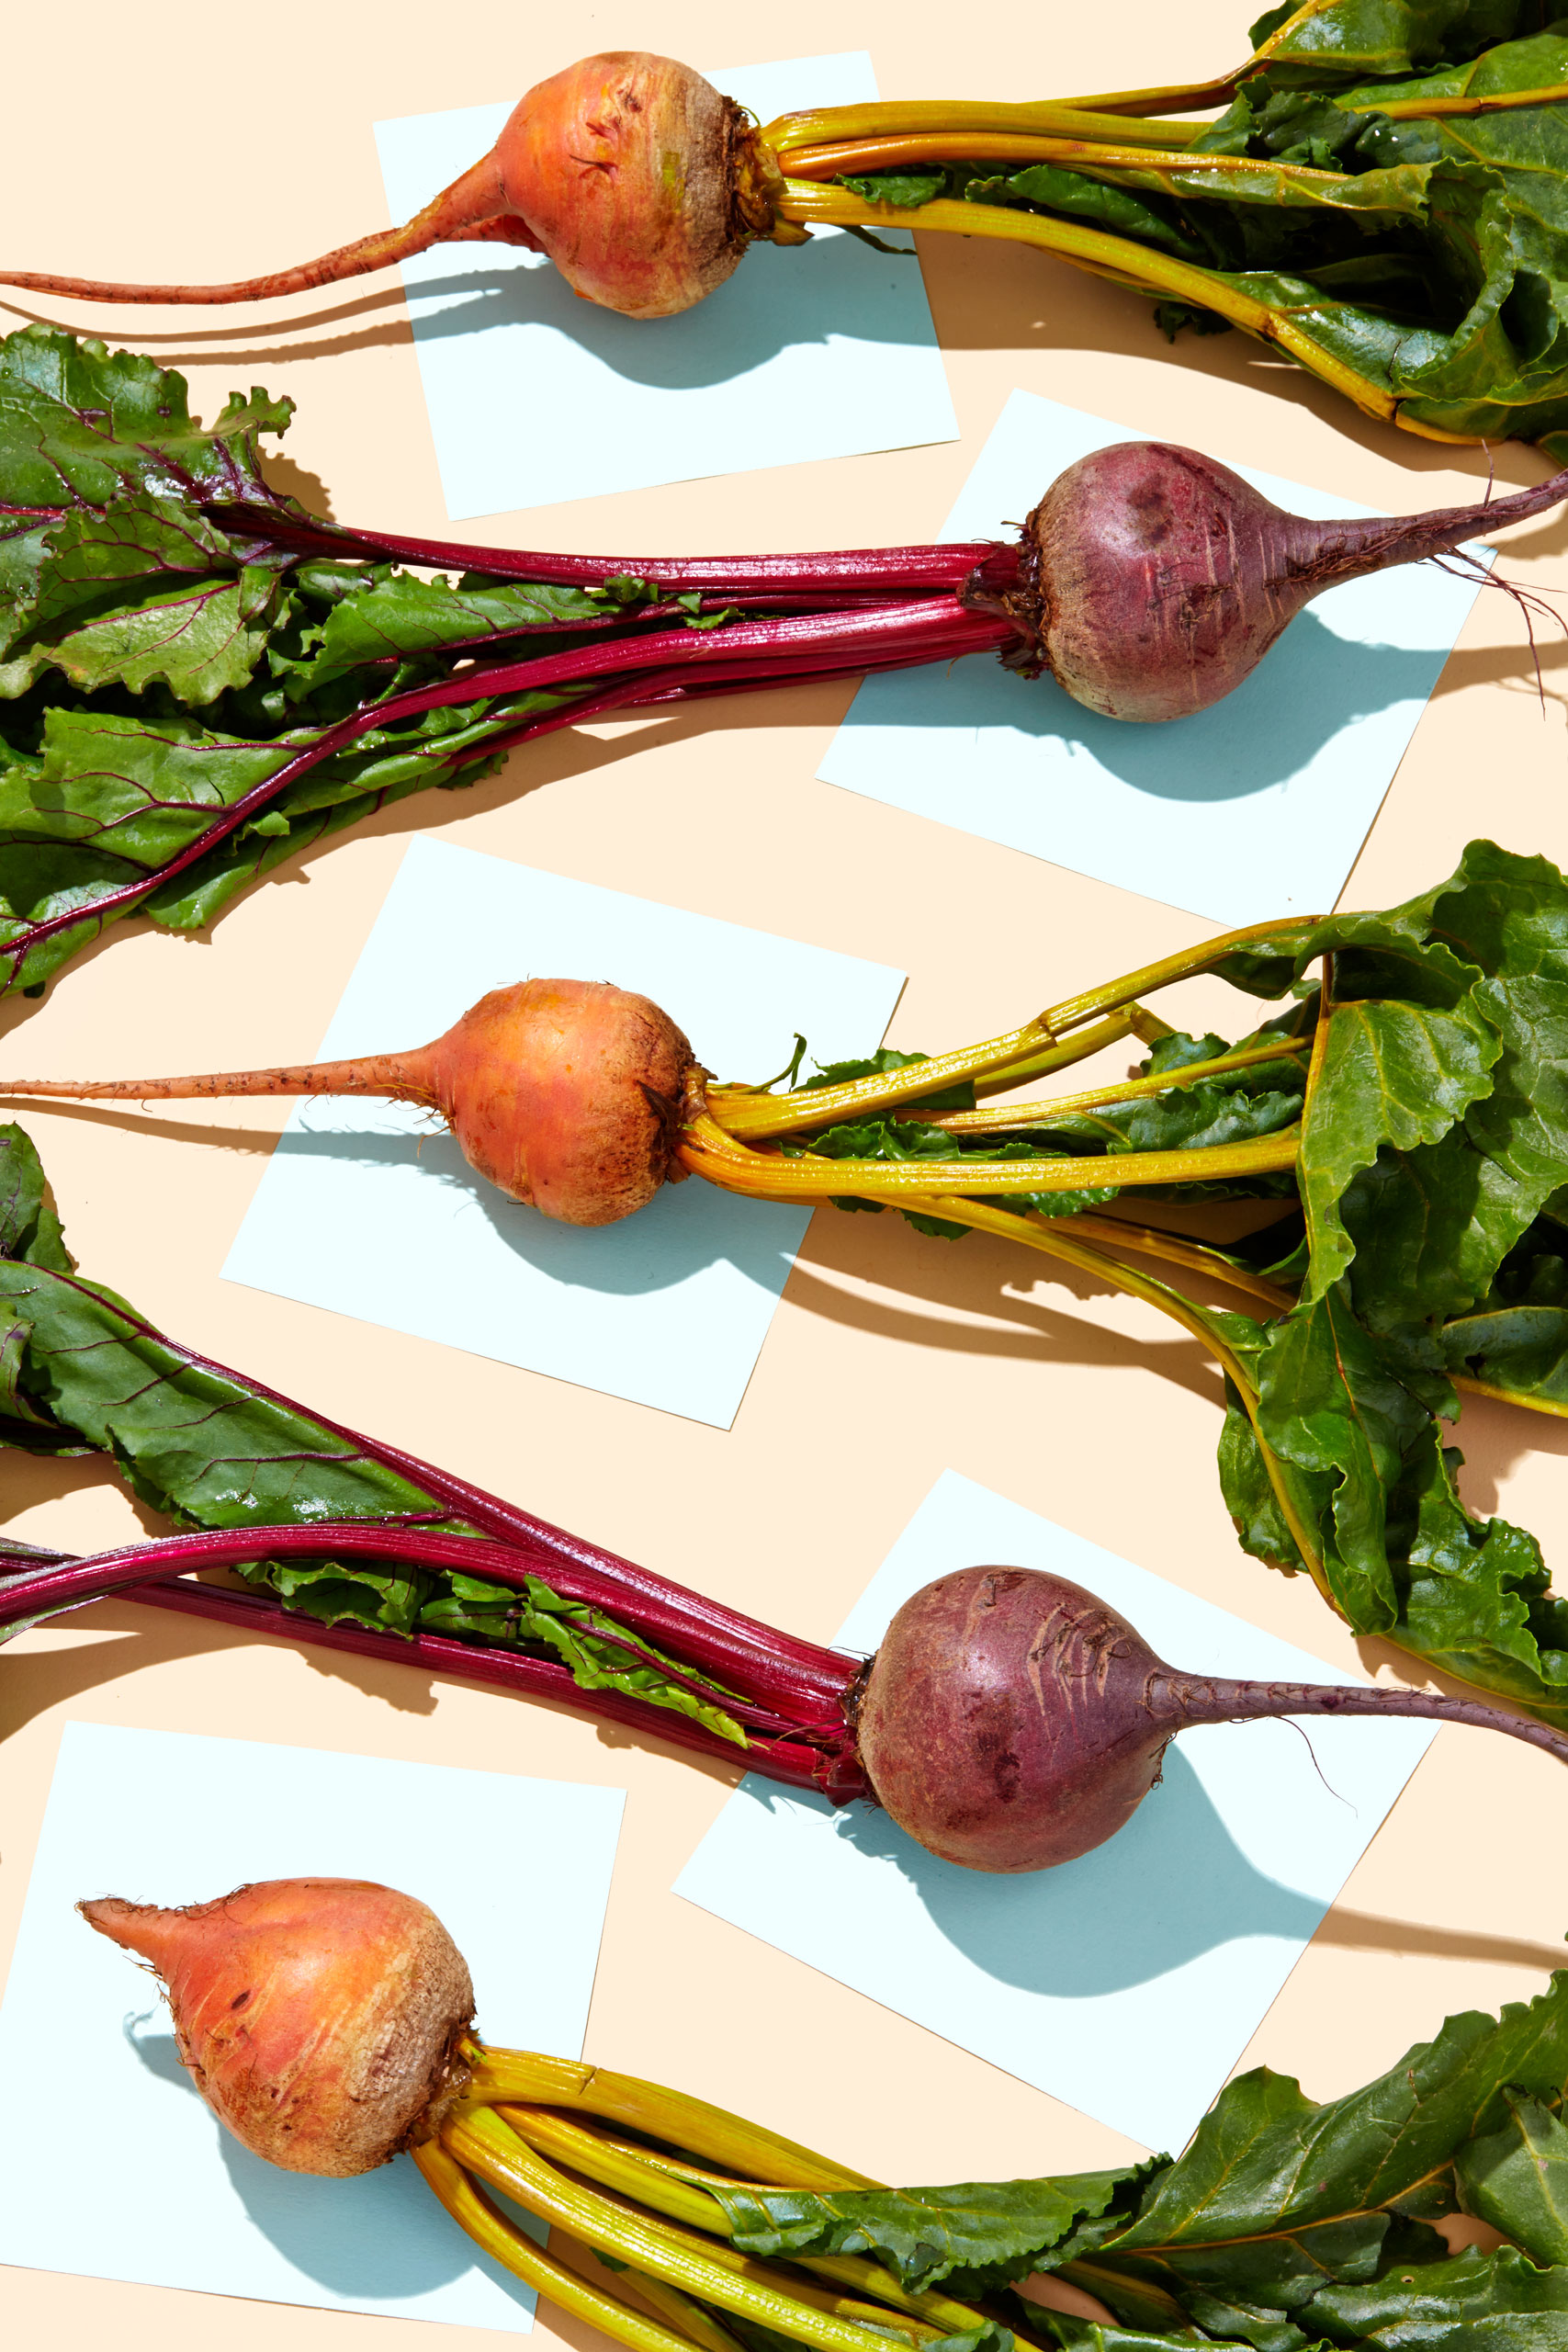 healthiest foods, health food, diet, nutrition, time.com stock, beets, vegetables